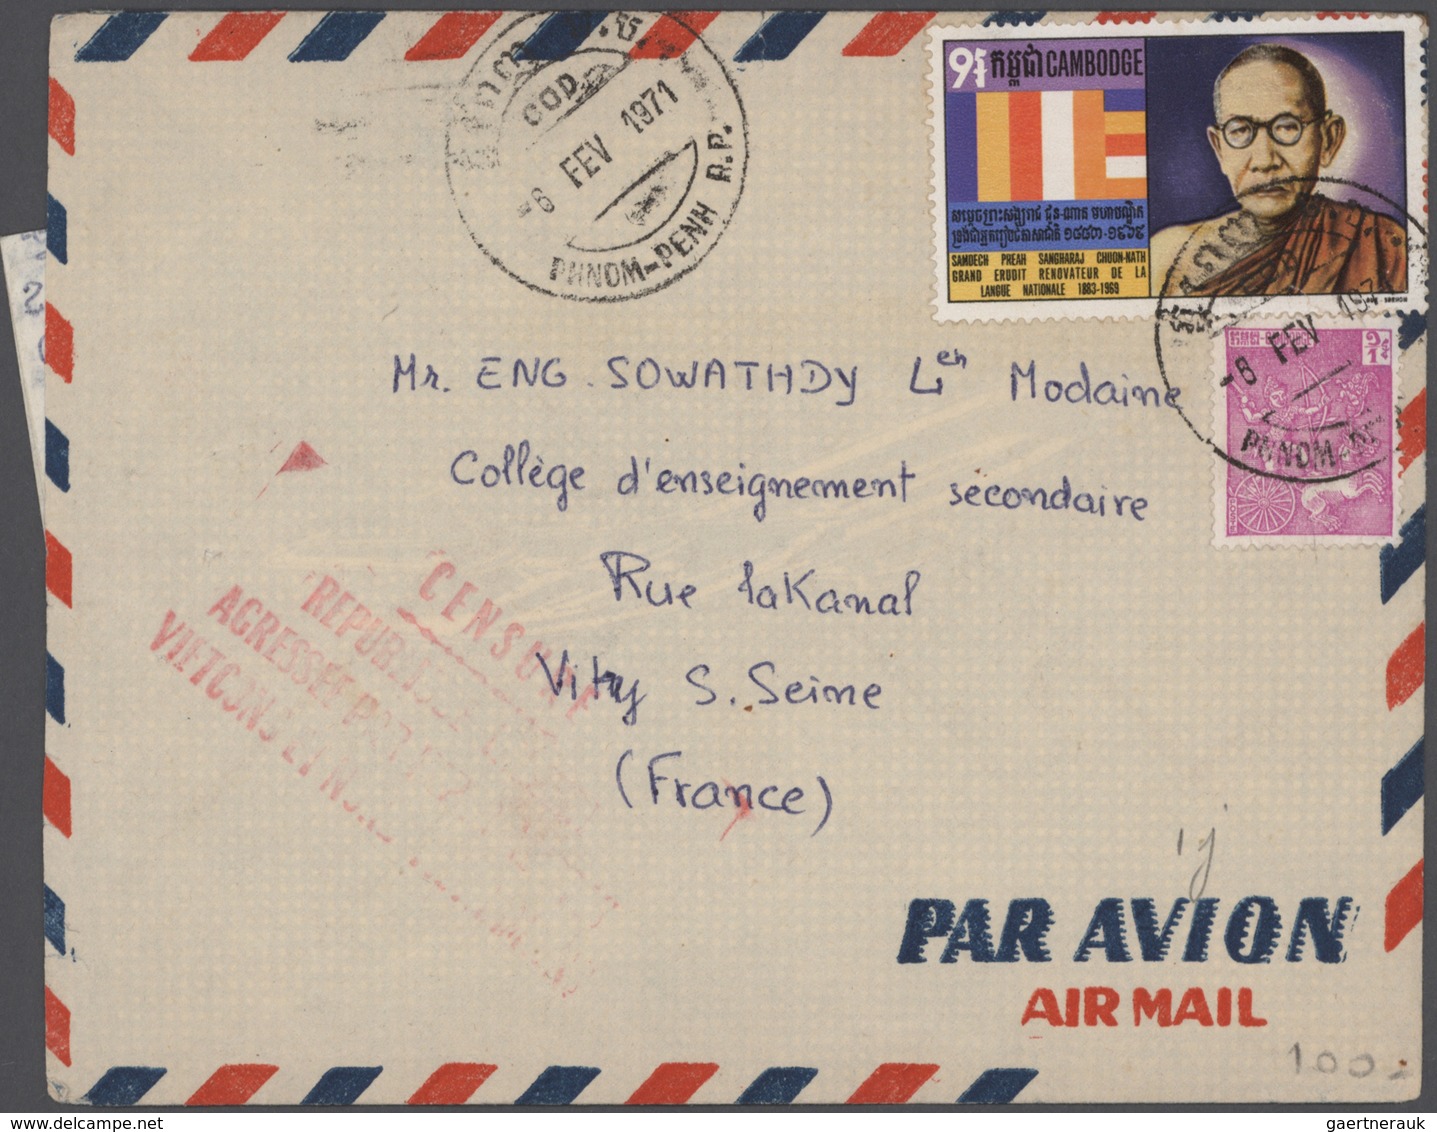 Kambodscha: 1971/89, Covers (11 Inc. One Inbound 1978 From US W. "service Temporarily Suspended" Aux - Camboya